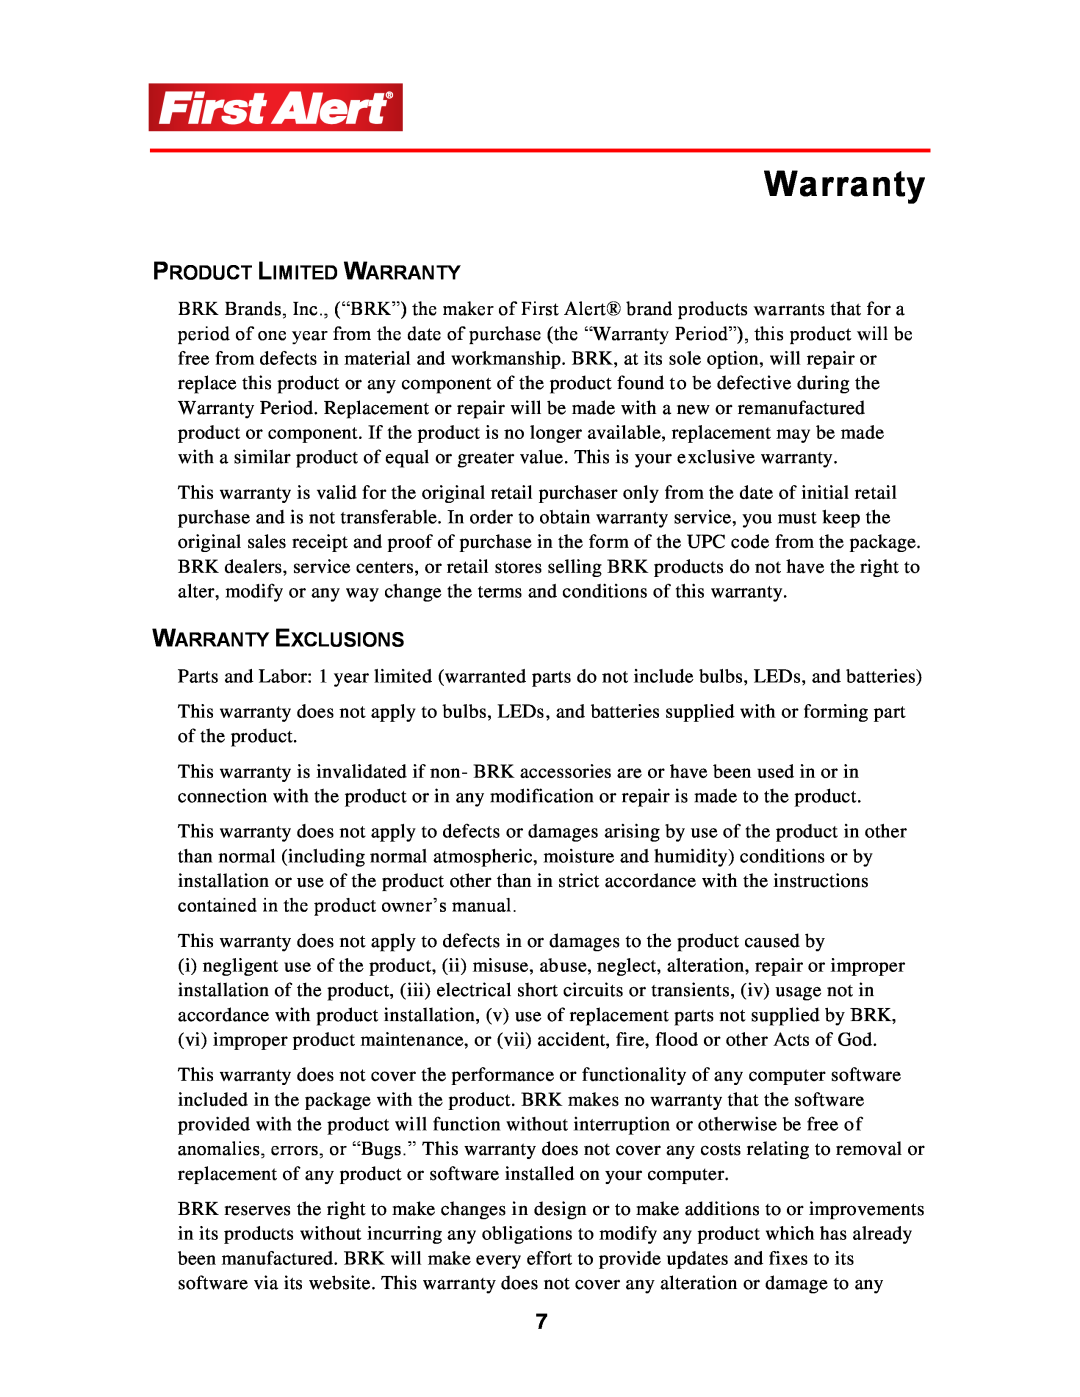 First Alert P-500 user manual Product Limited Warranty, Warranty Exclusions 